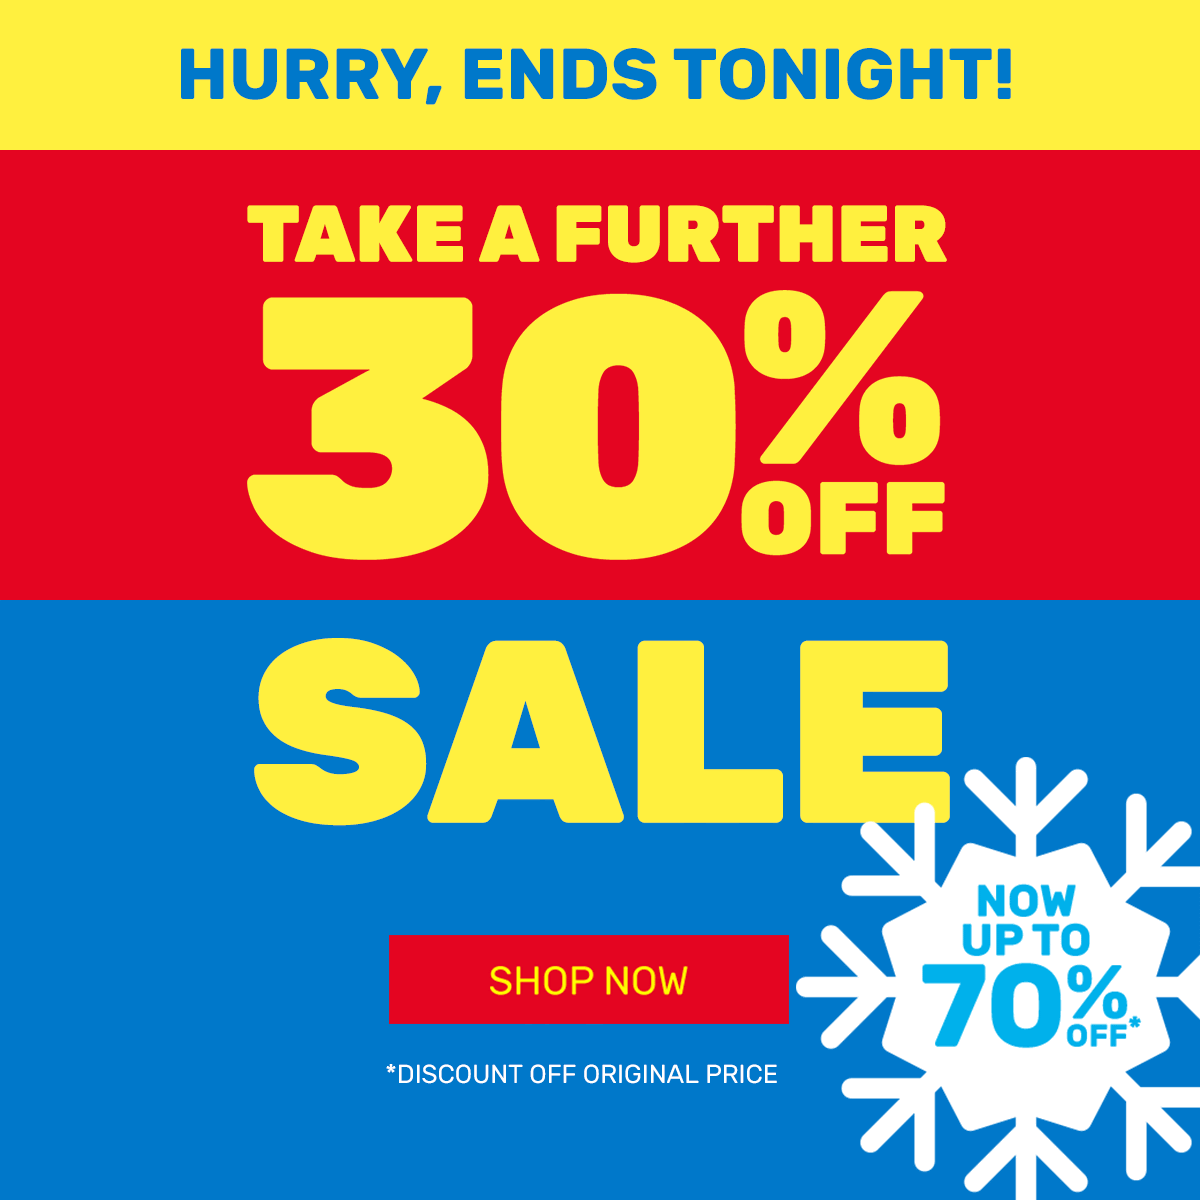 Take a Further 30% Off SALE